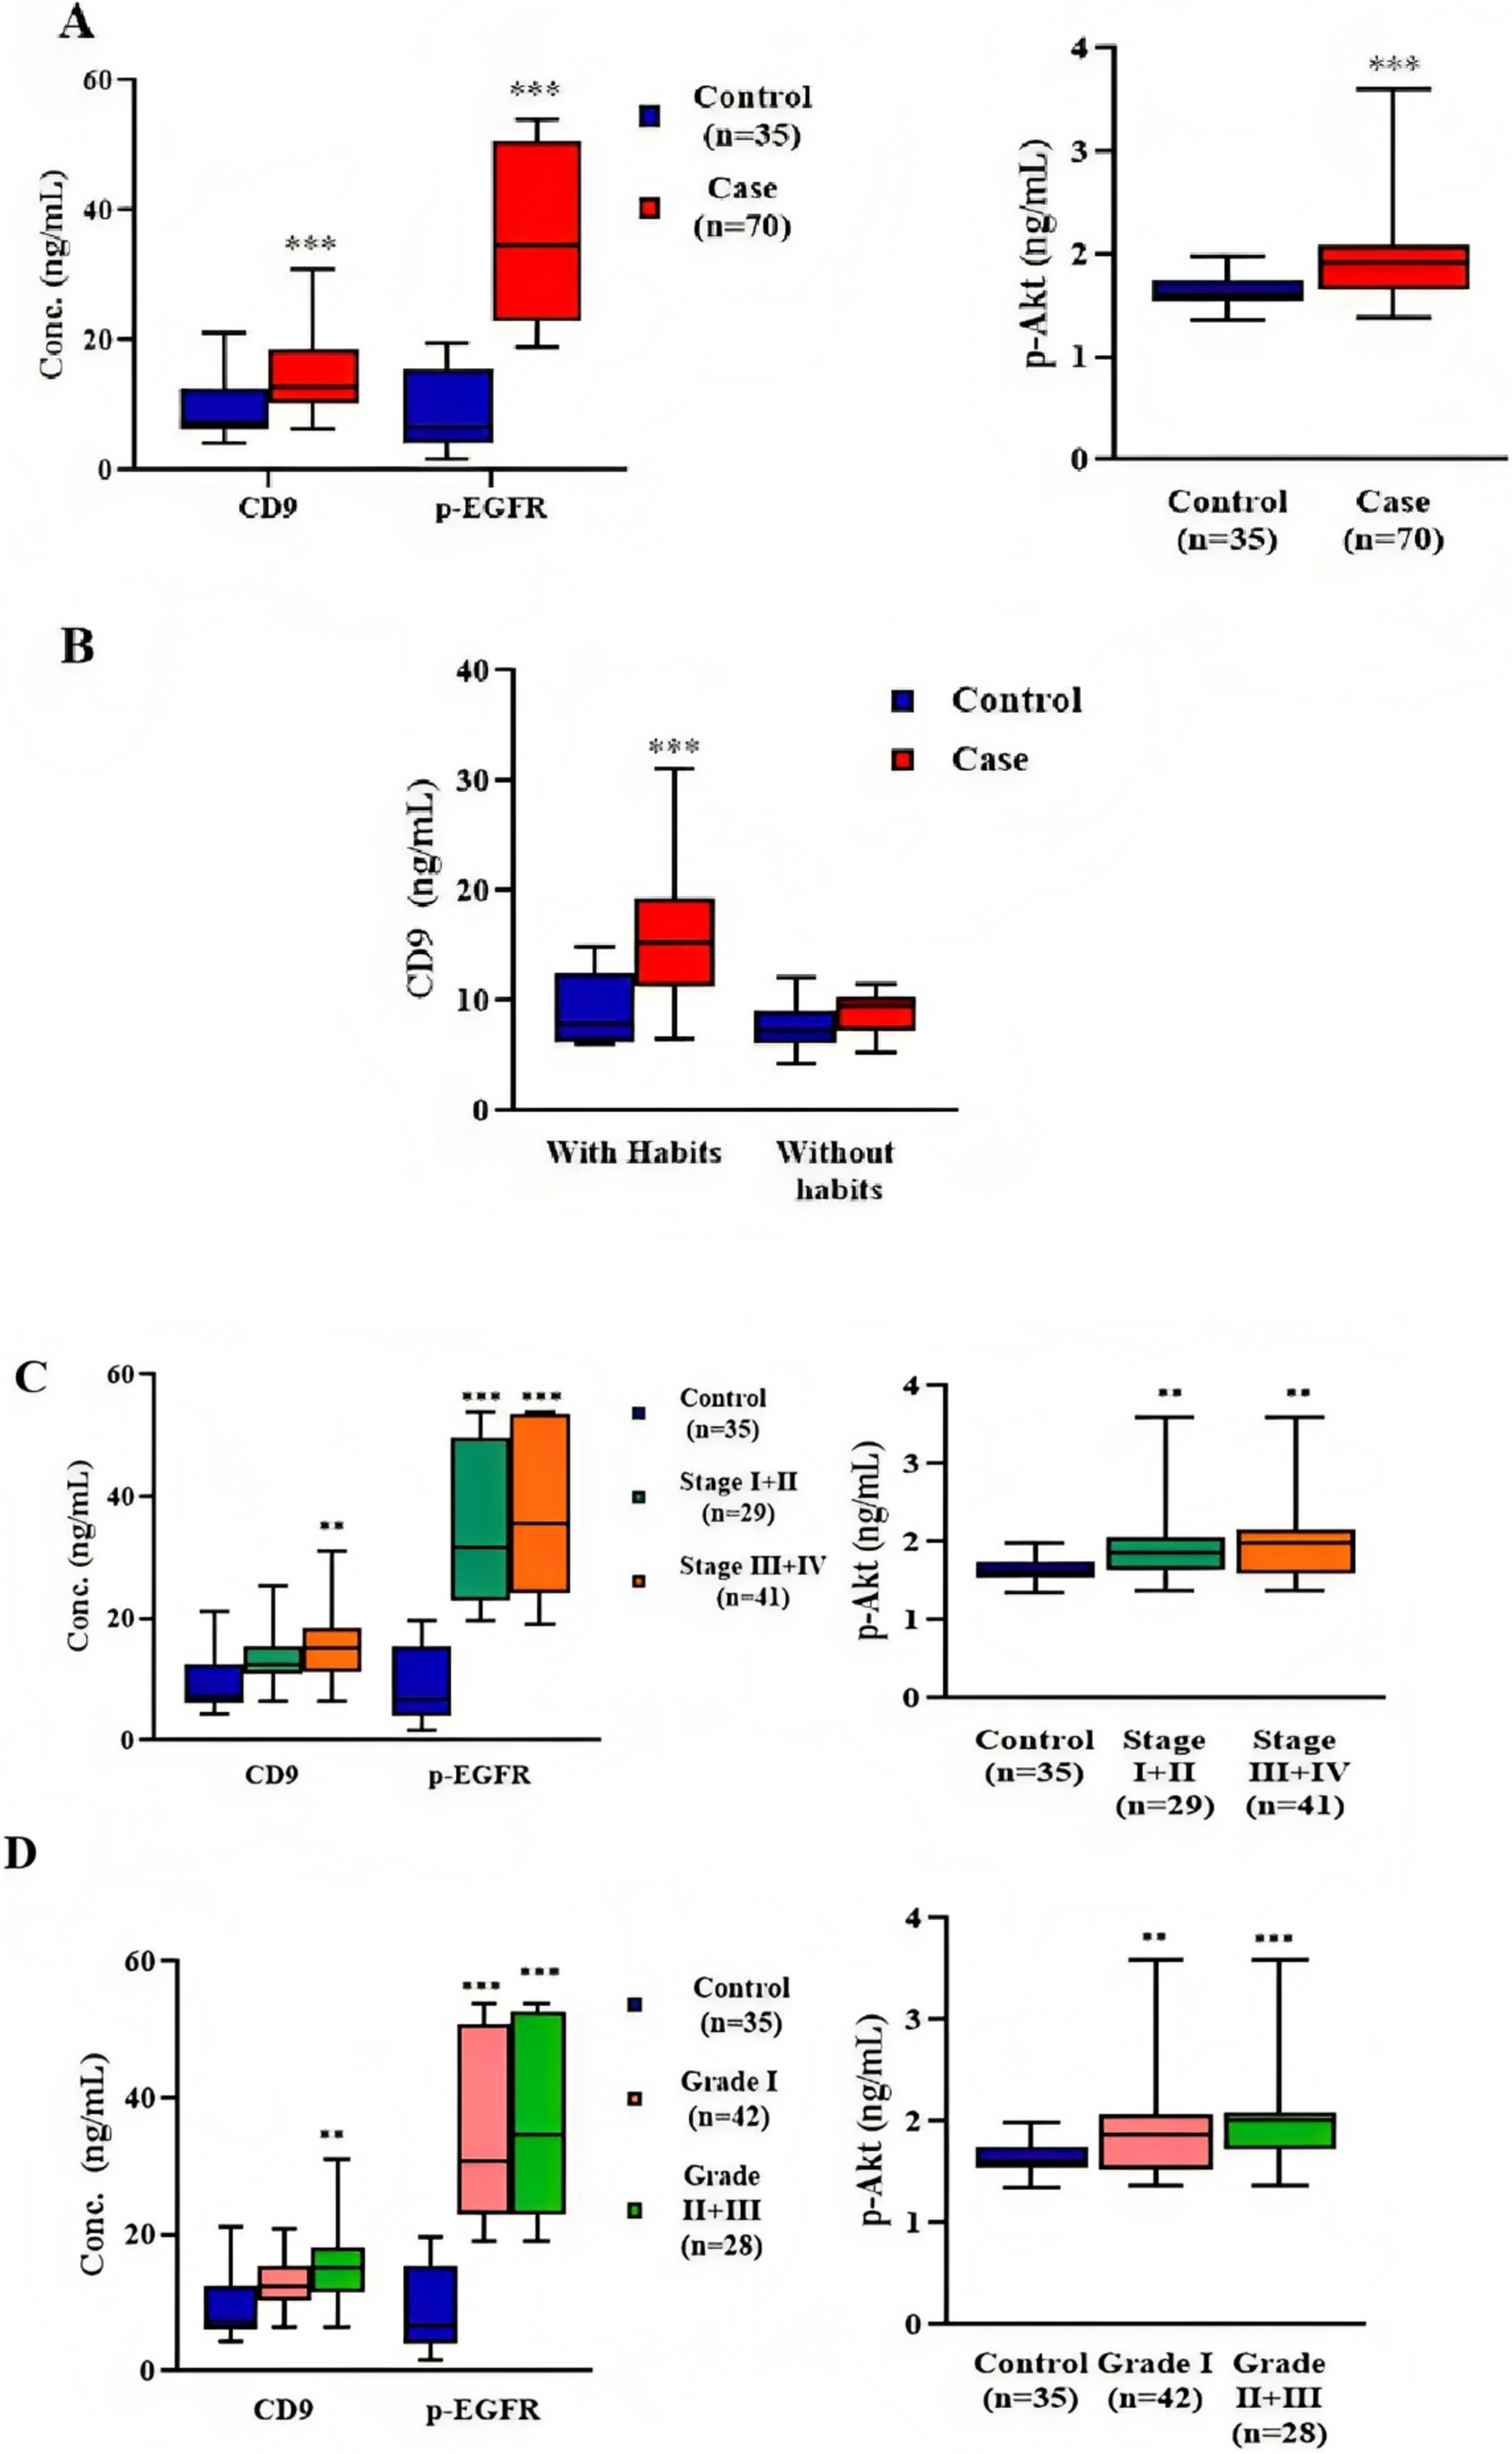 High expression of CD9 and Epidermal Growth Factor Receptor promotes the development of tongue cancer